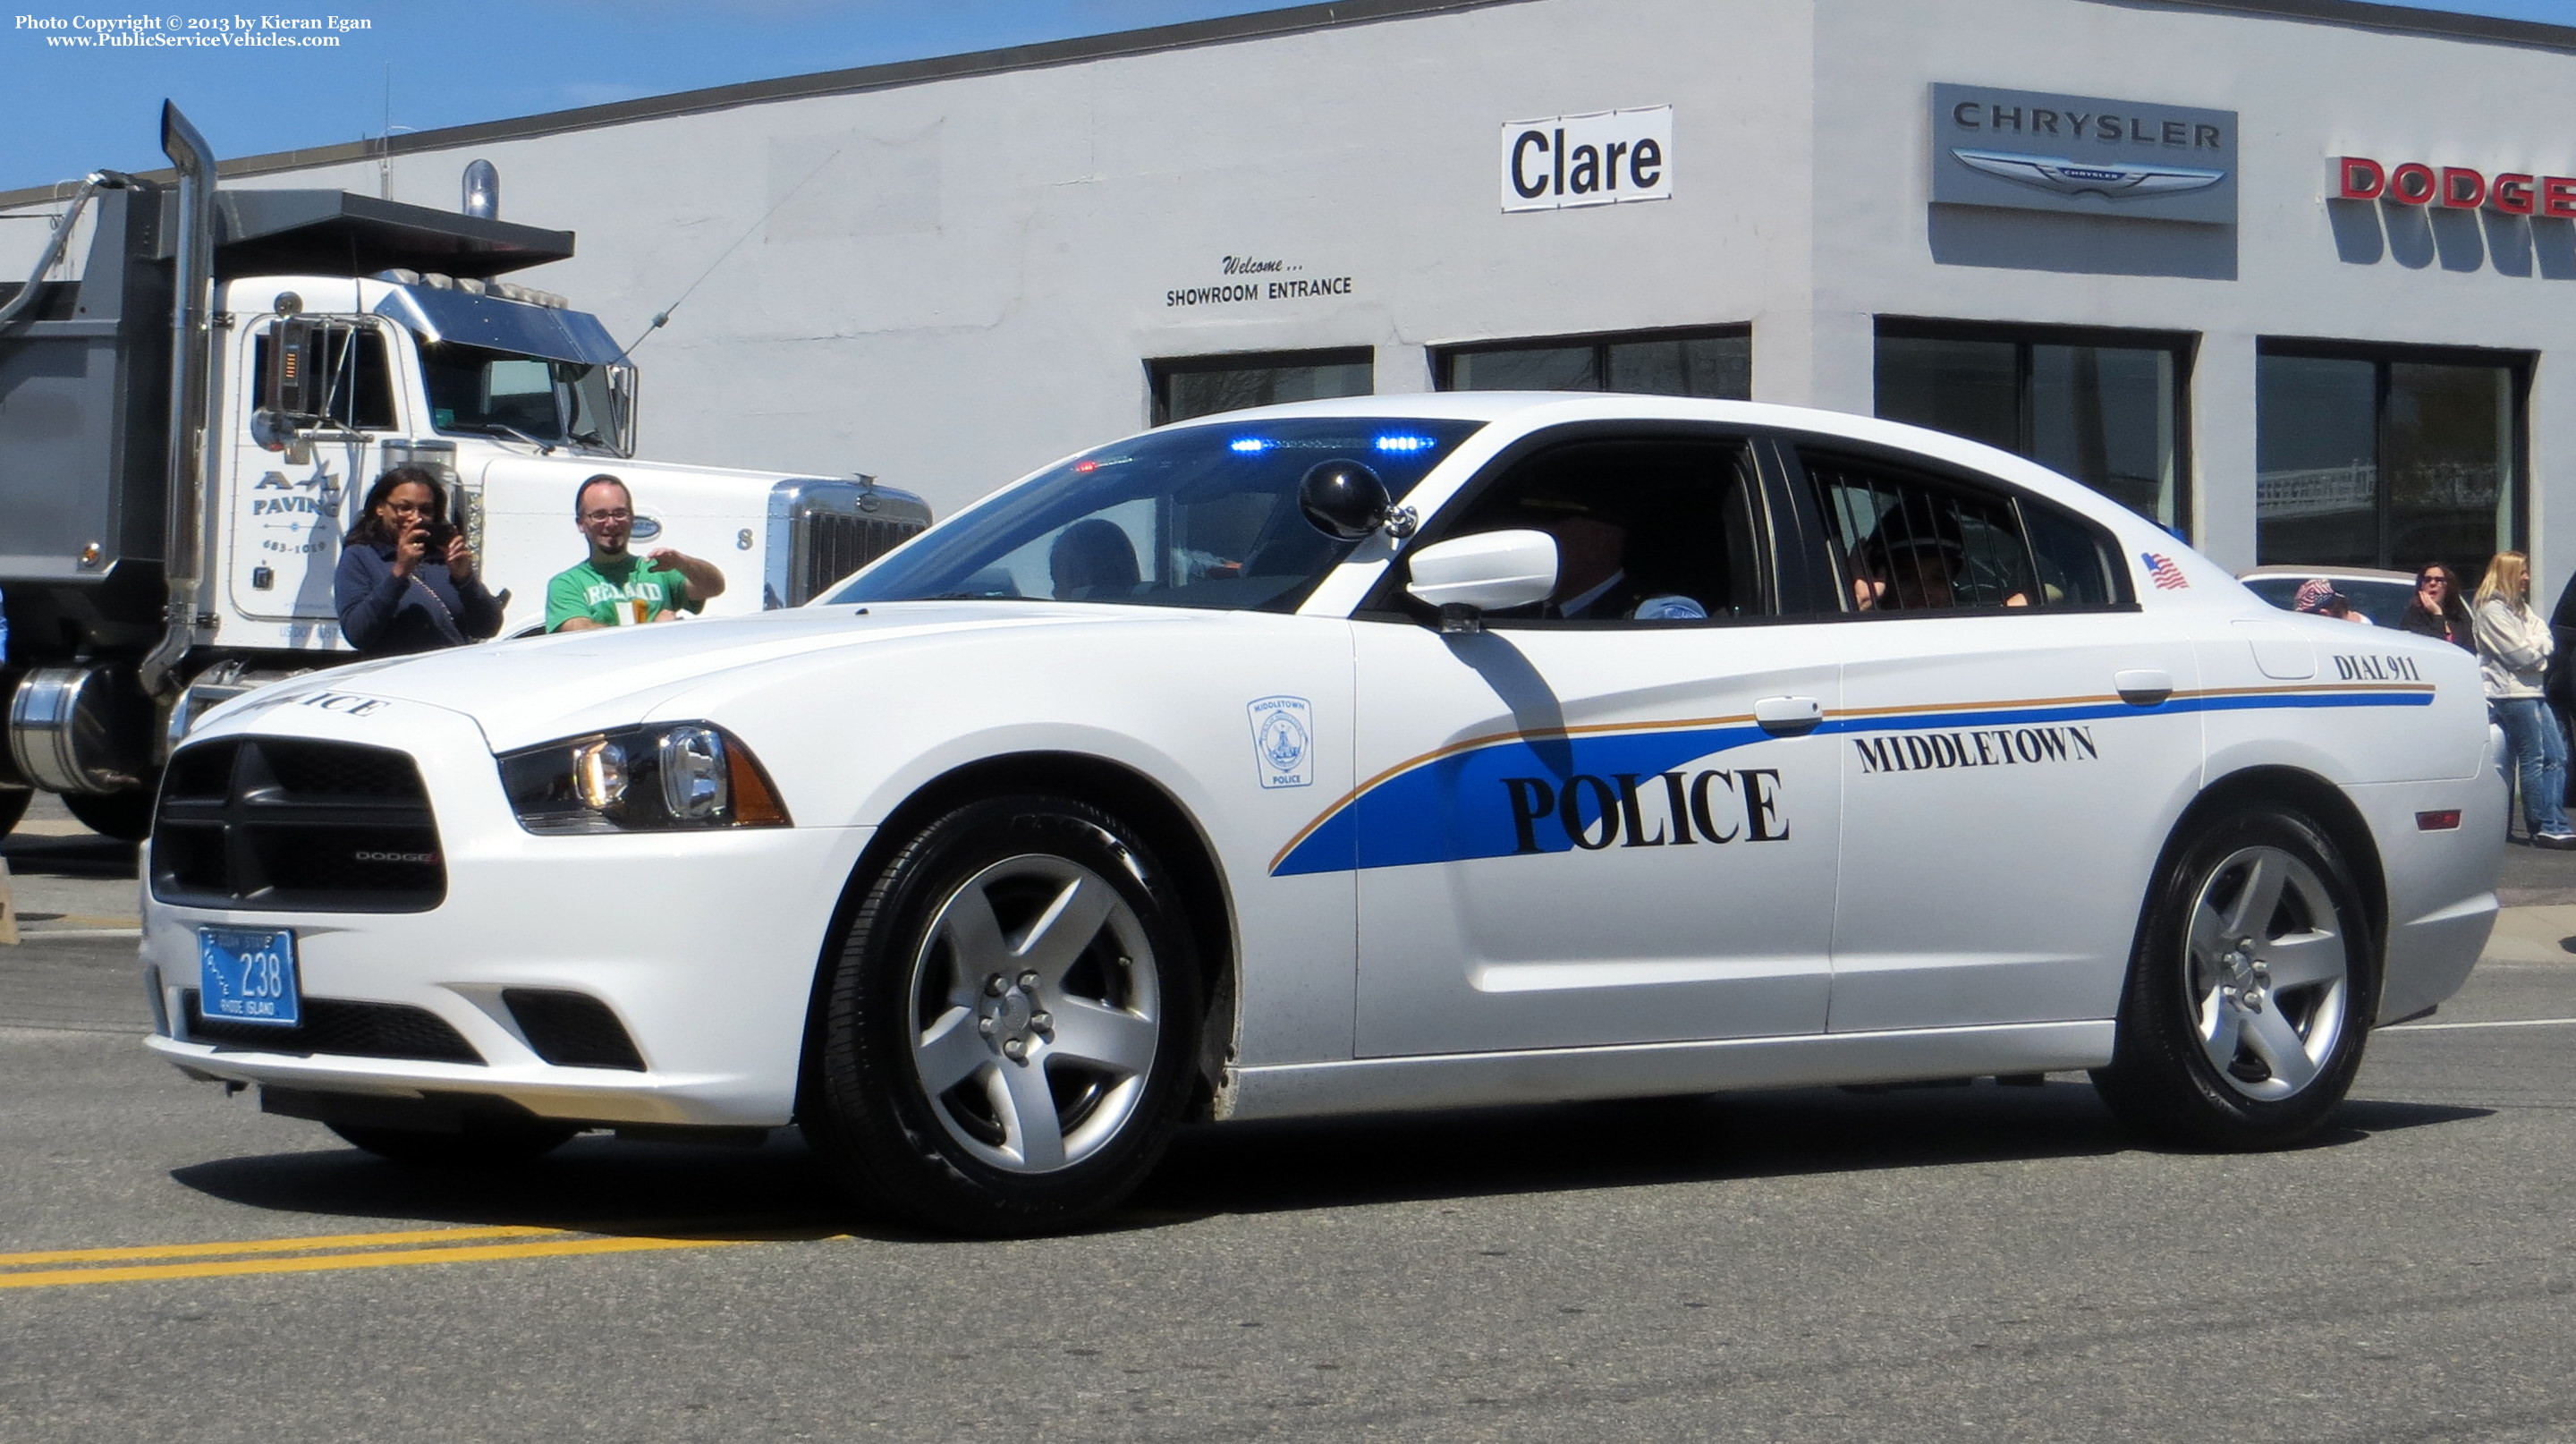 A photo  of Middletown Police
            Cruiser 238, a 2014 Dodge Charger             taken by Kieran Egan